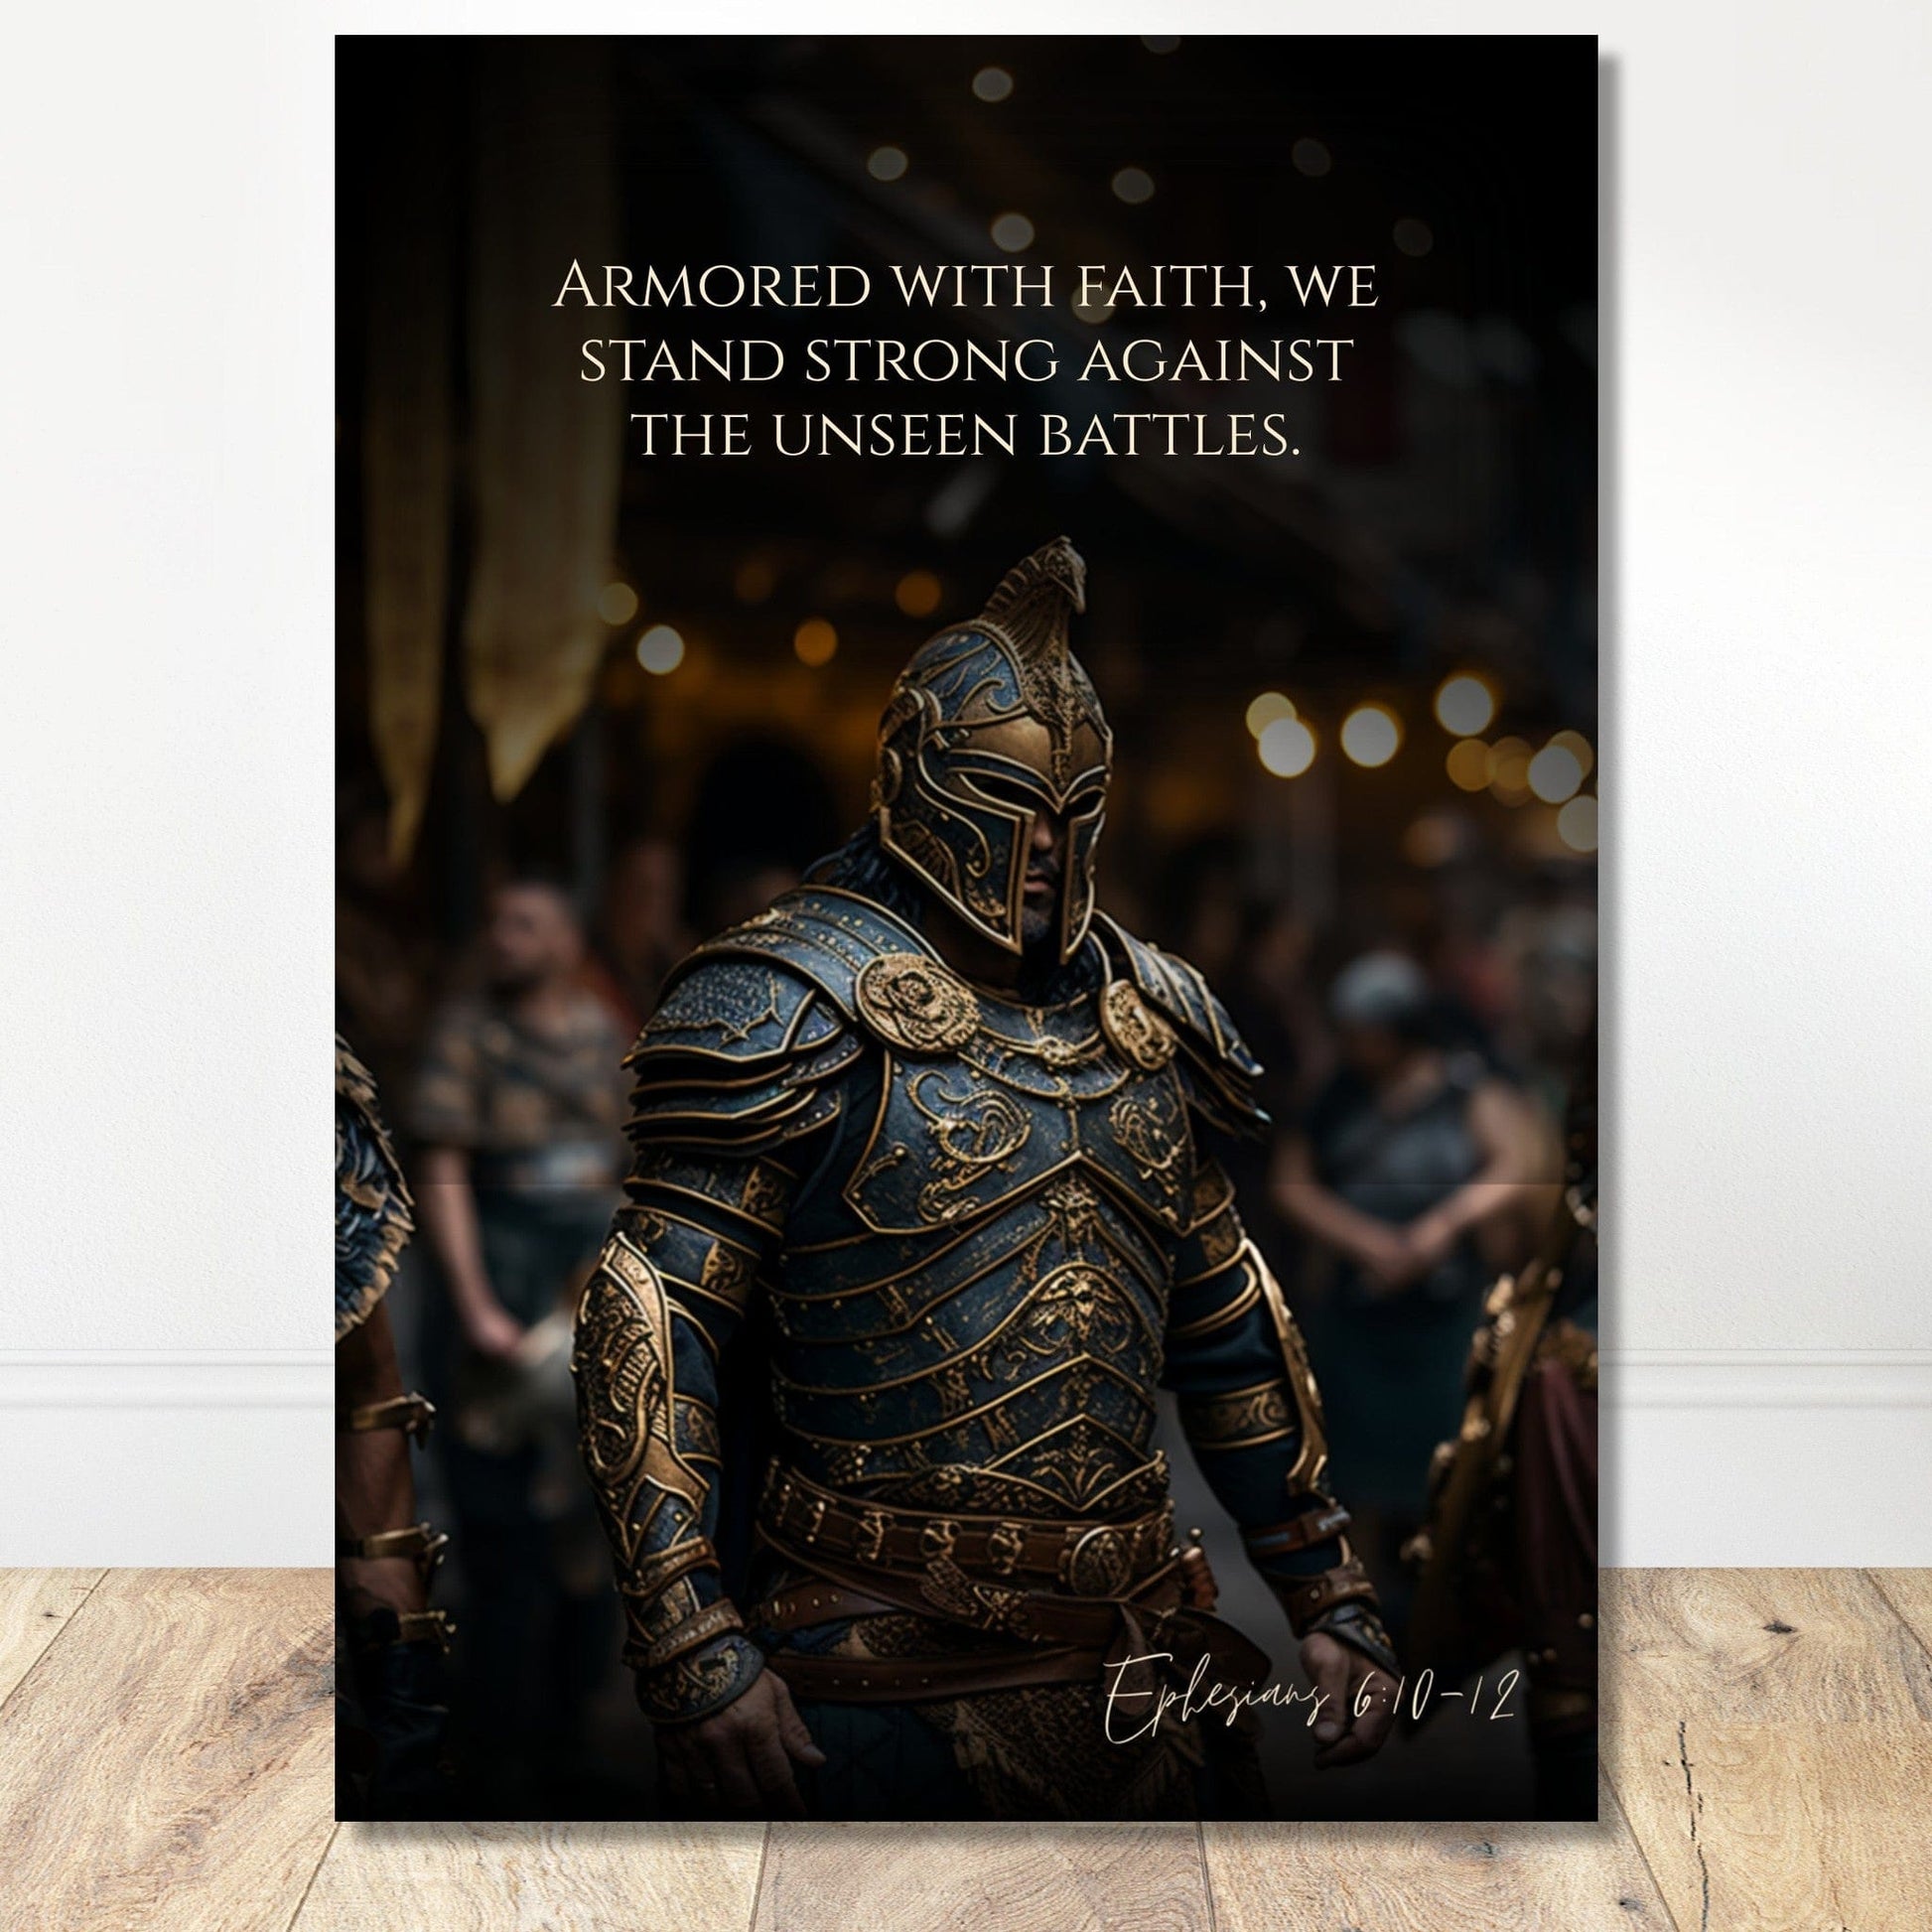 Coffee With My Father Print Material A4 21x29.7 cm / 8x12″ / Premium Matte Paper Poster / - The Unseen Battles: Ephesians 6:10-12 - Artwork